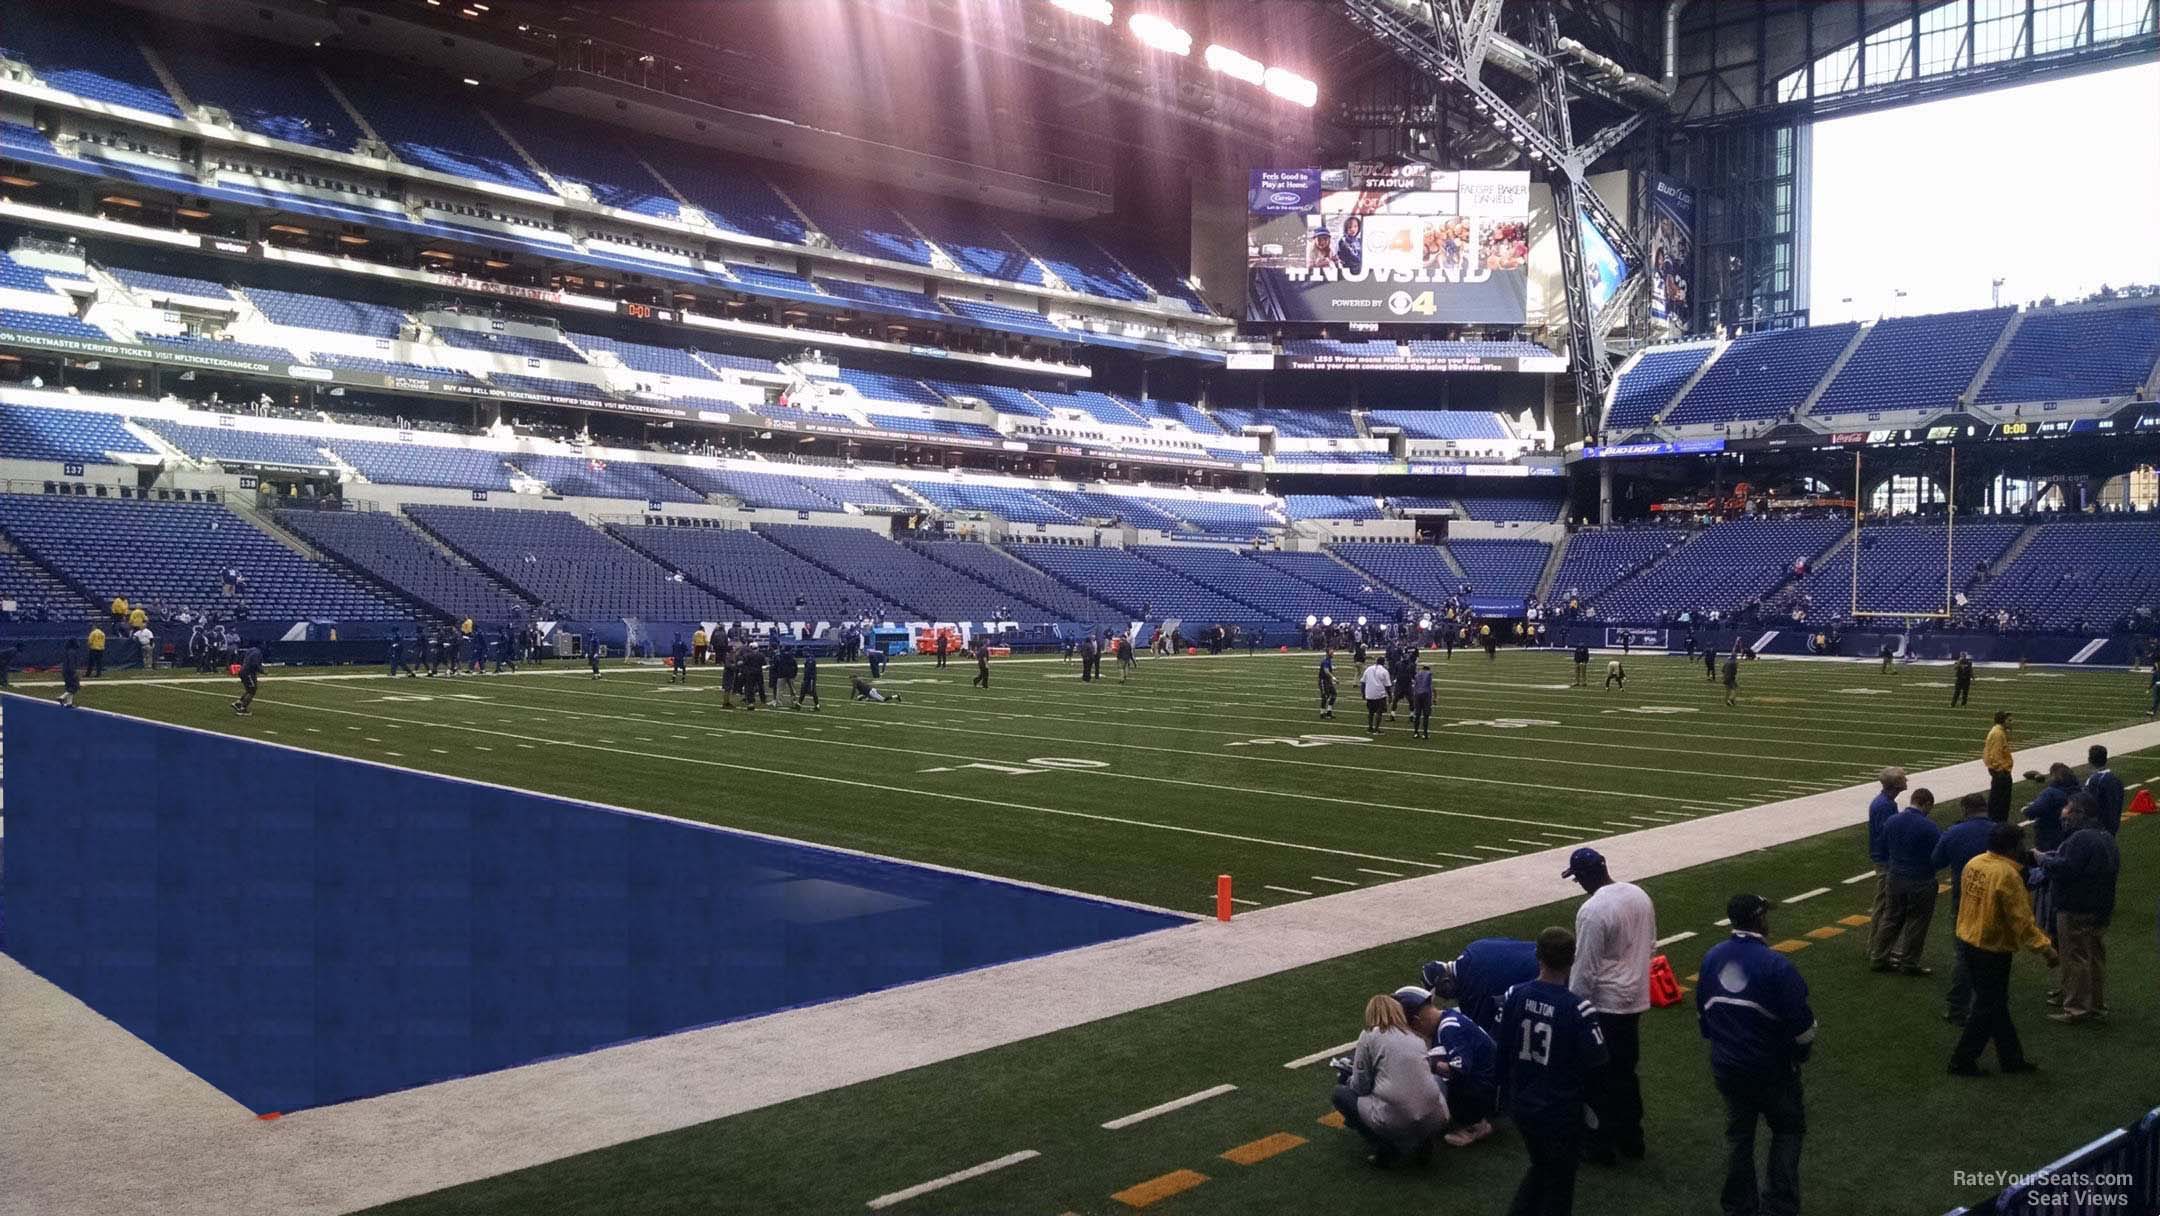 section 121, row 4 seat view  for football - lucas oil stadium